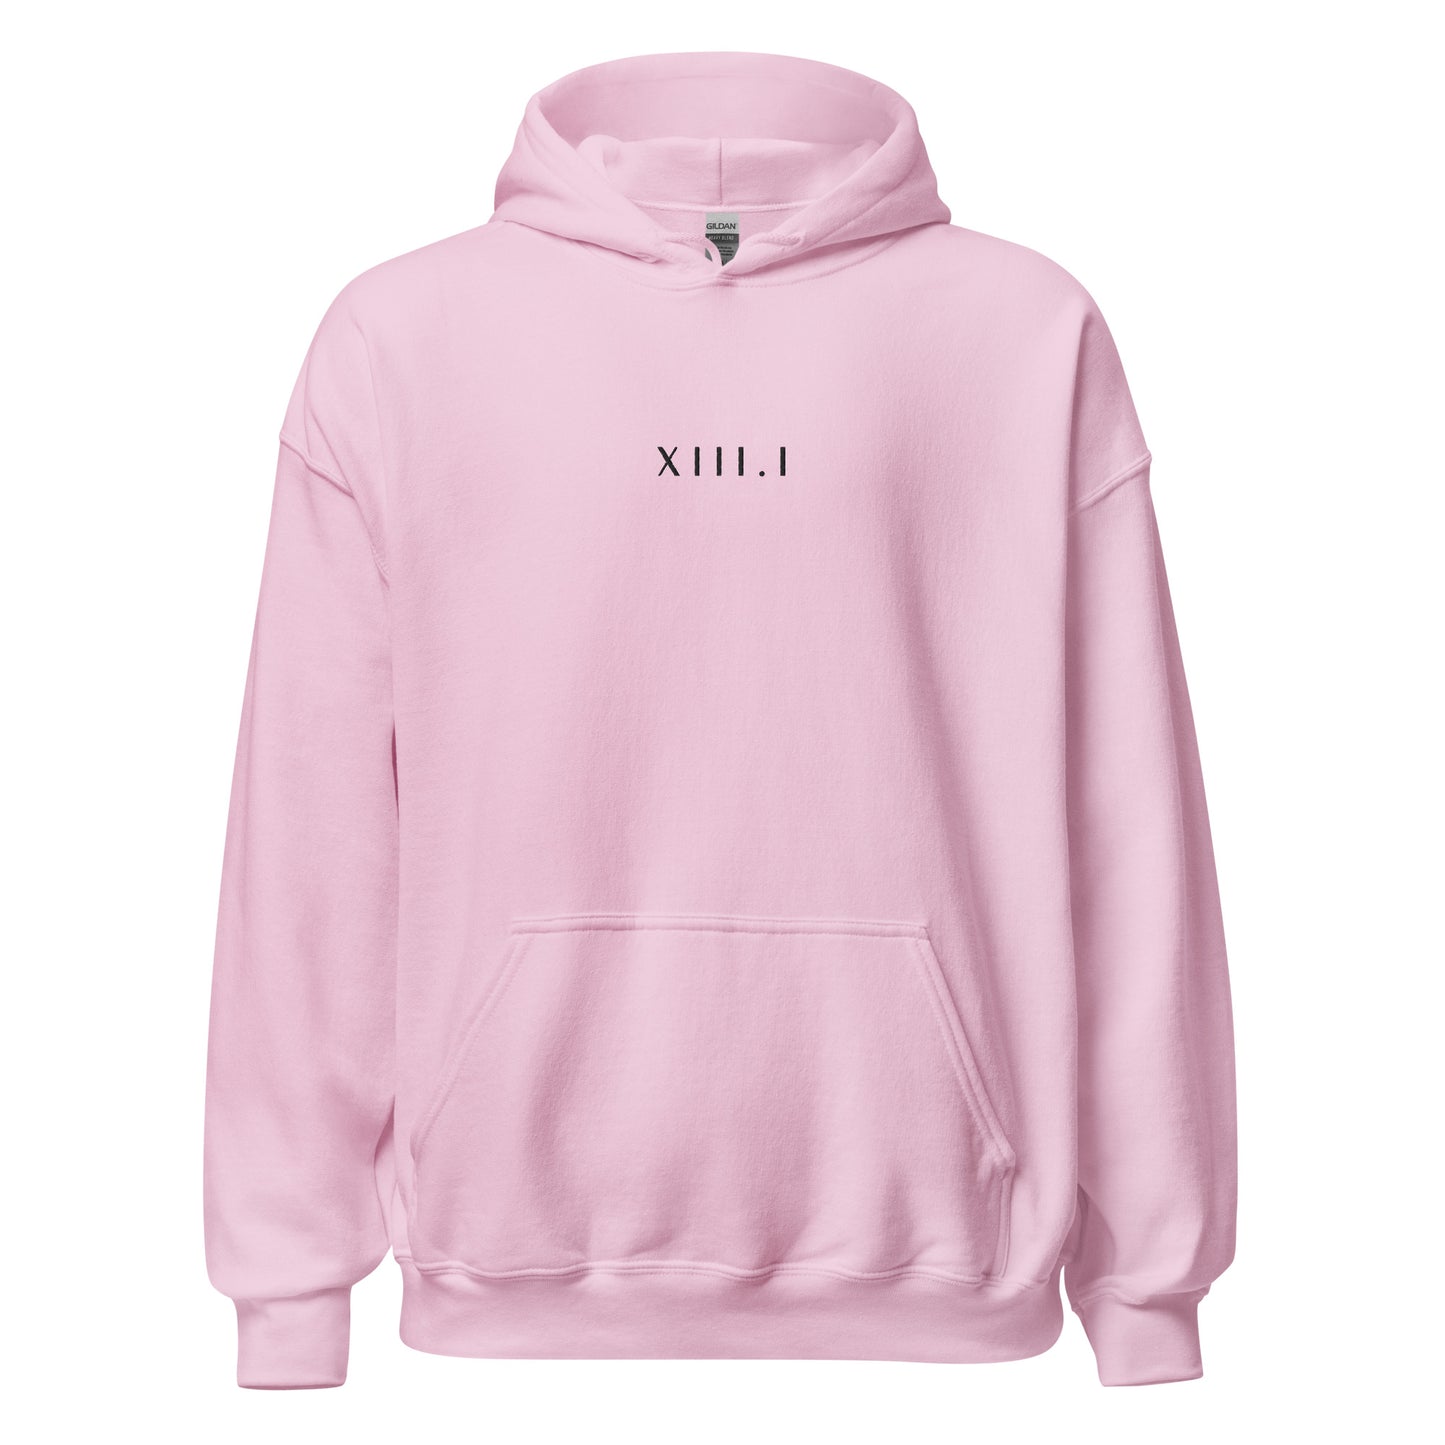 light pink unisex hoodie with XIII.I 13.1 half marathon in roman numerals embroidered in black writing